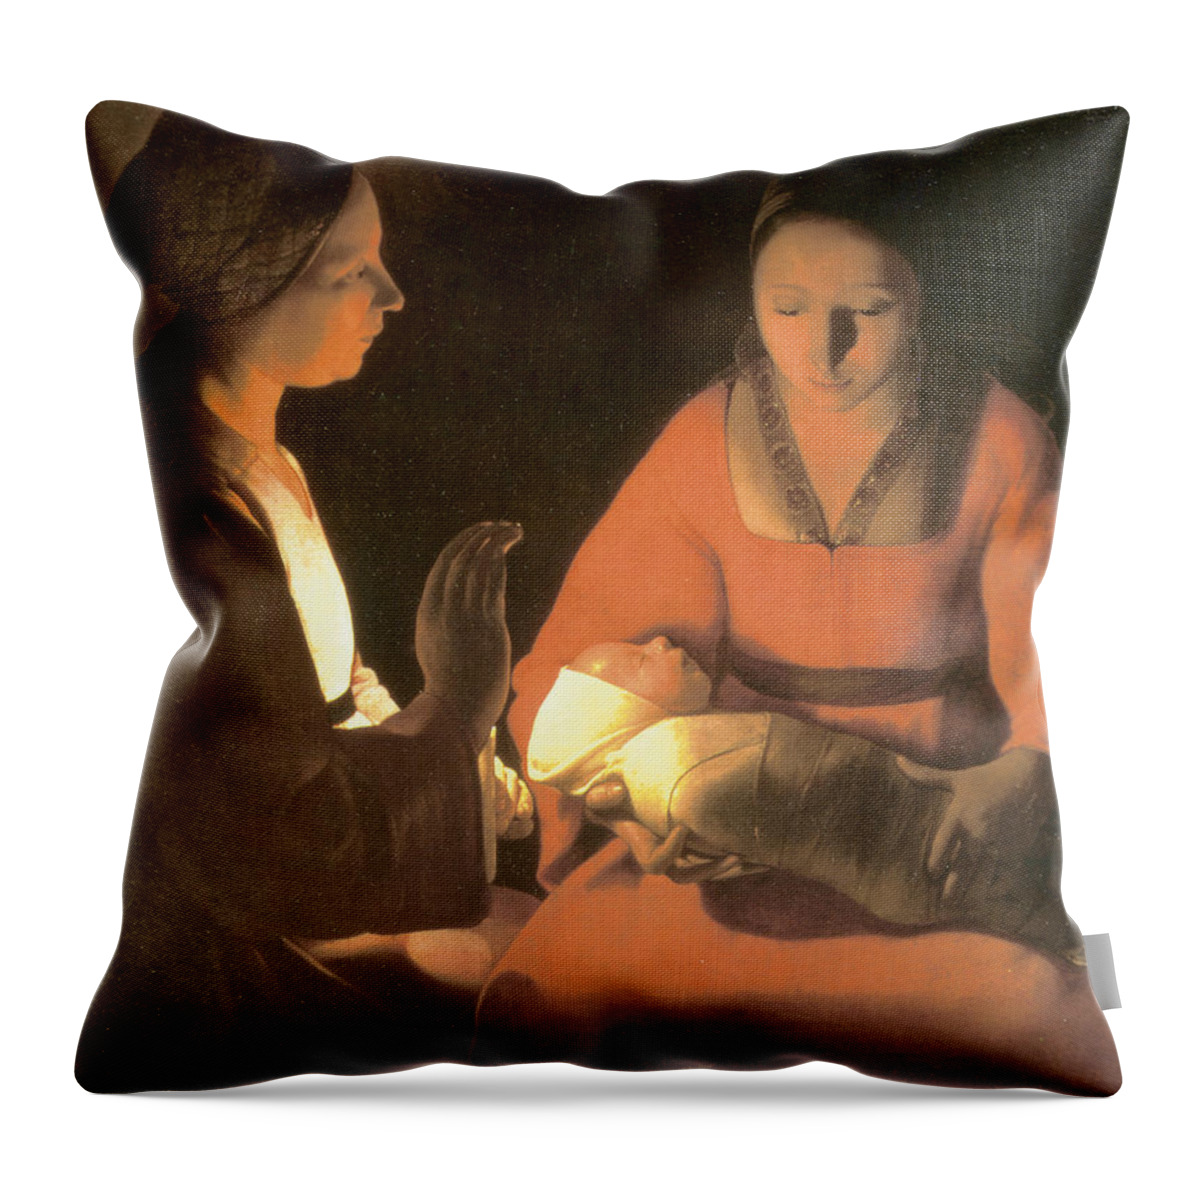 The New Born Child Throw Pillow featuring the painting The New Born Child, c. 1645 by George De La Tour